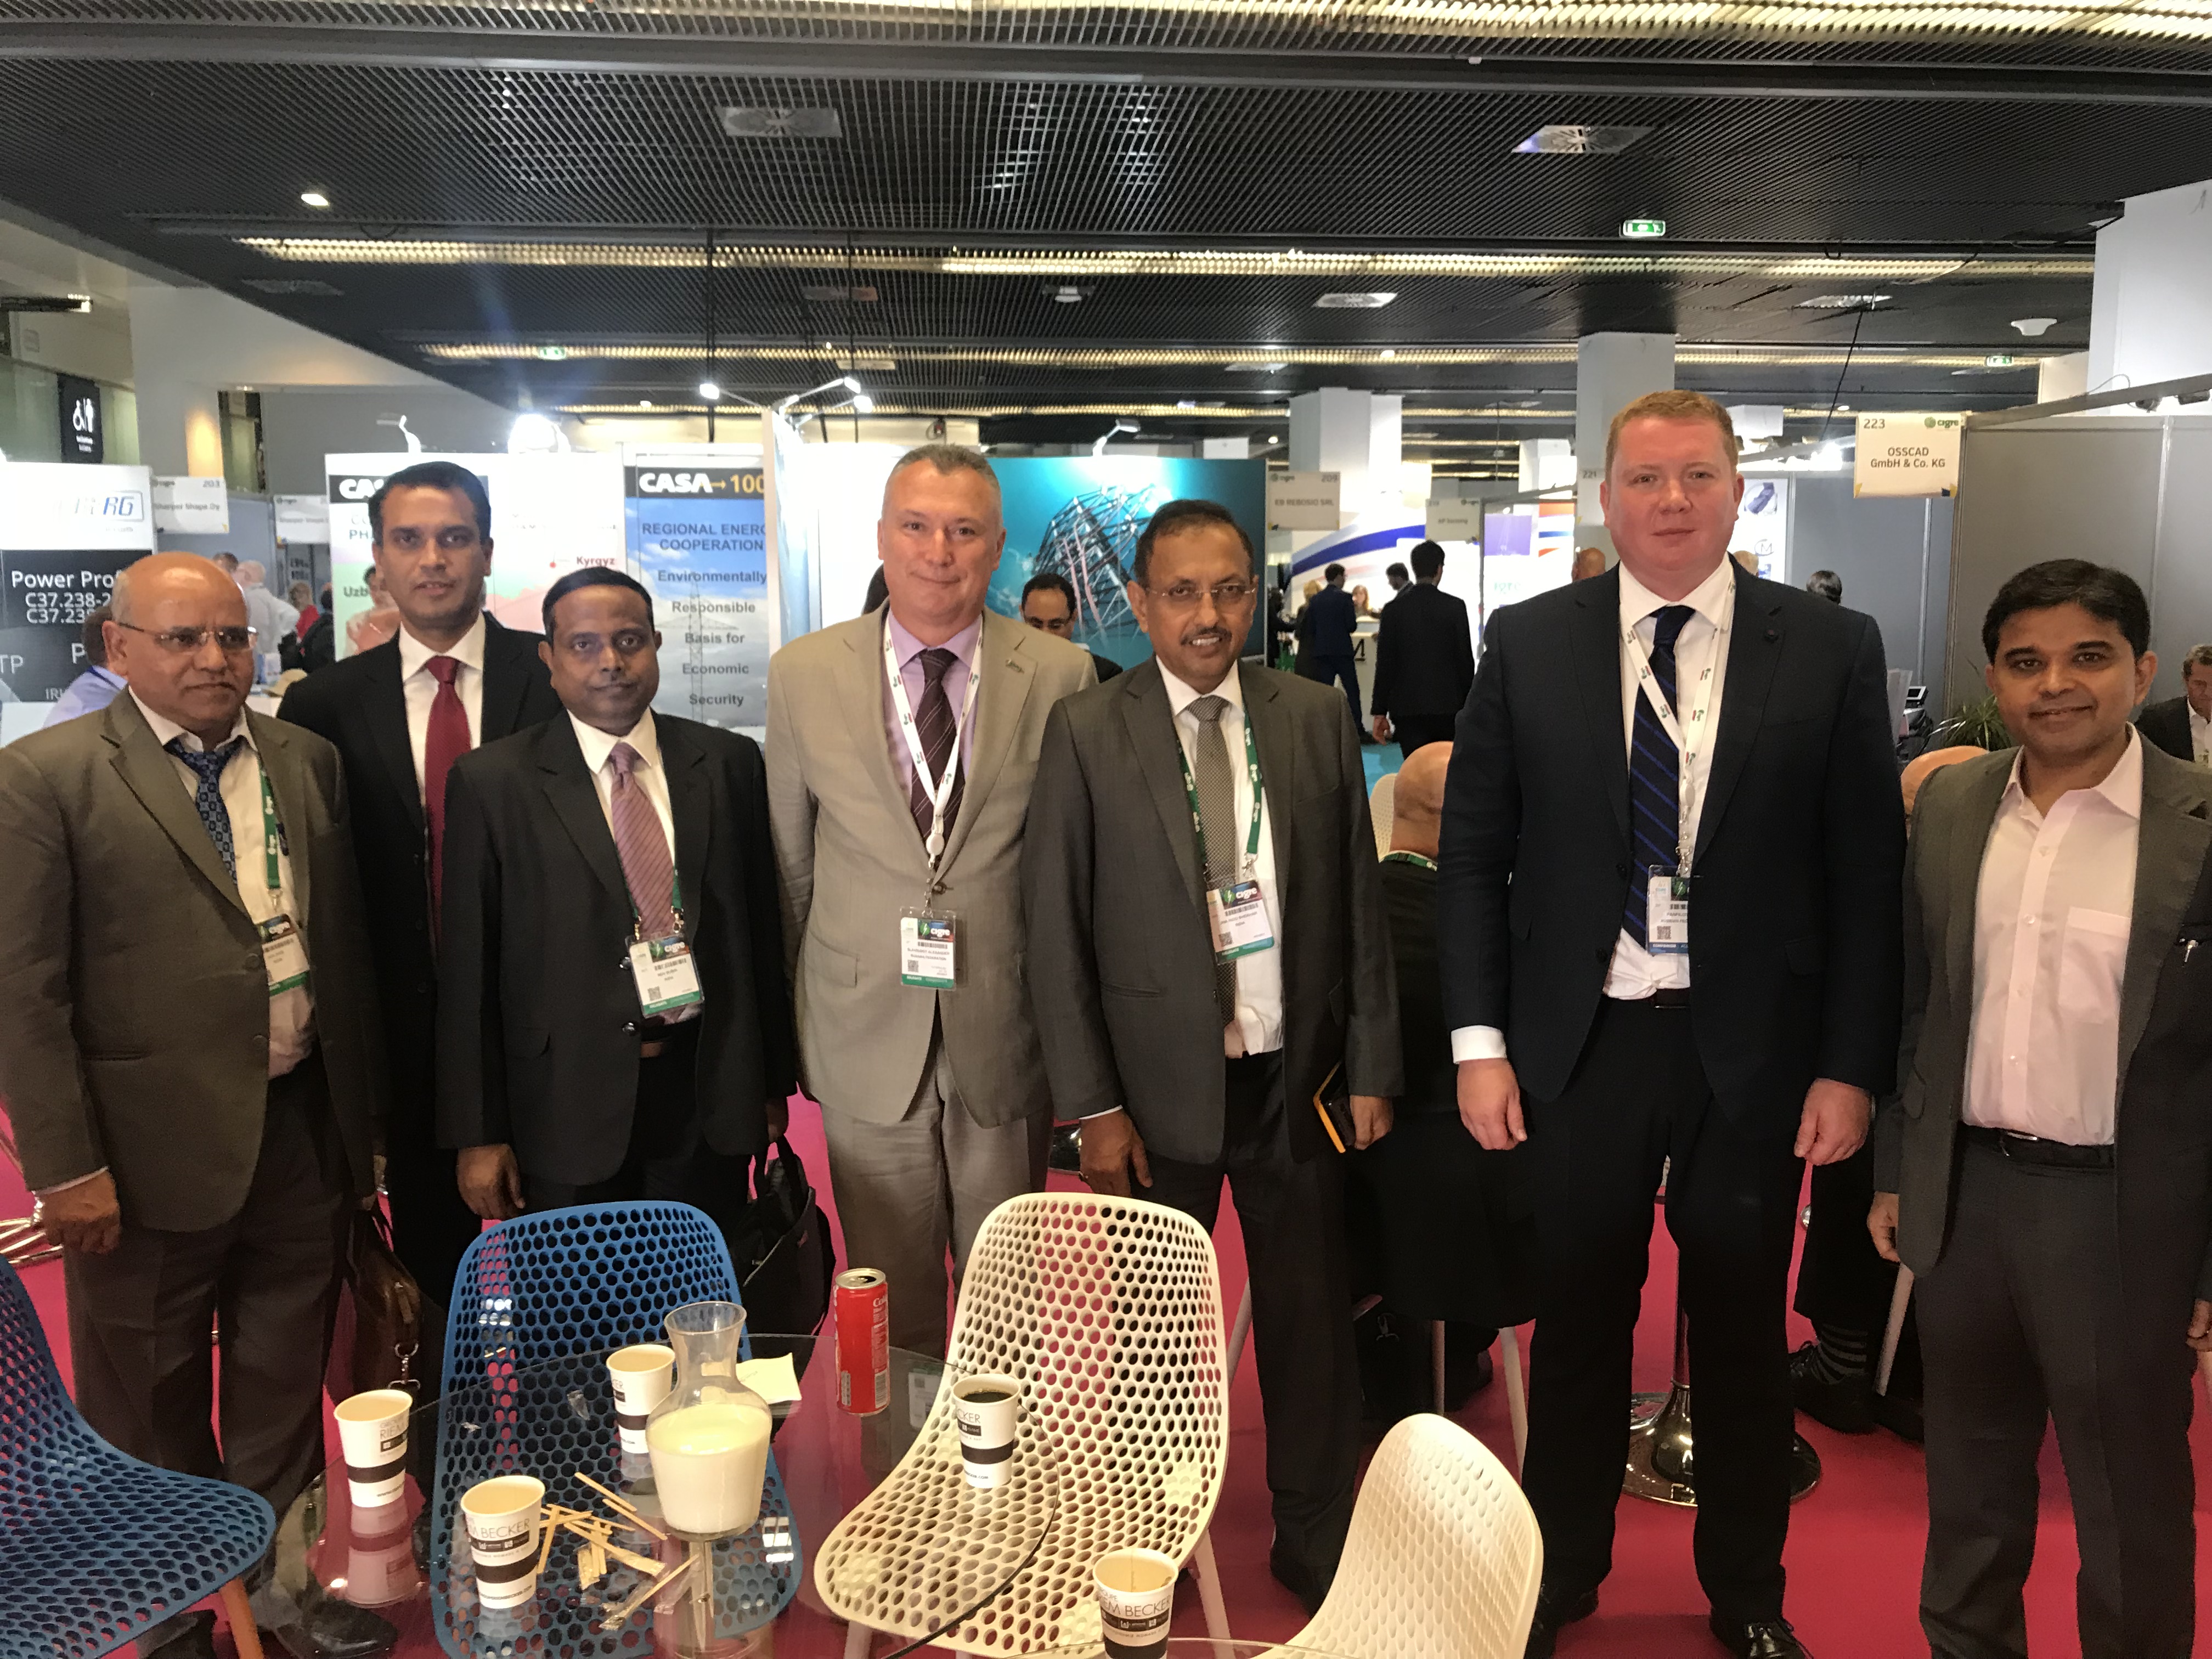 Trilateral meeting at the 47th CIGRE Session. Center – Chairman of the Board of Directors at Izolyator Alexander Slavinsky, L-R: Chairman and General Manager of PowerGrid I. S. Jha (I.S. Jha), Commercial Director and 1st Dpty CEO at Izolyator Ivan Panfilov and Executive Director at Mehru Electrical & Mechanical Engineers (P) Ltd. Sandeep Prakash Sharma